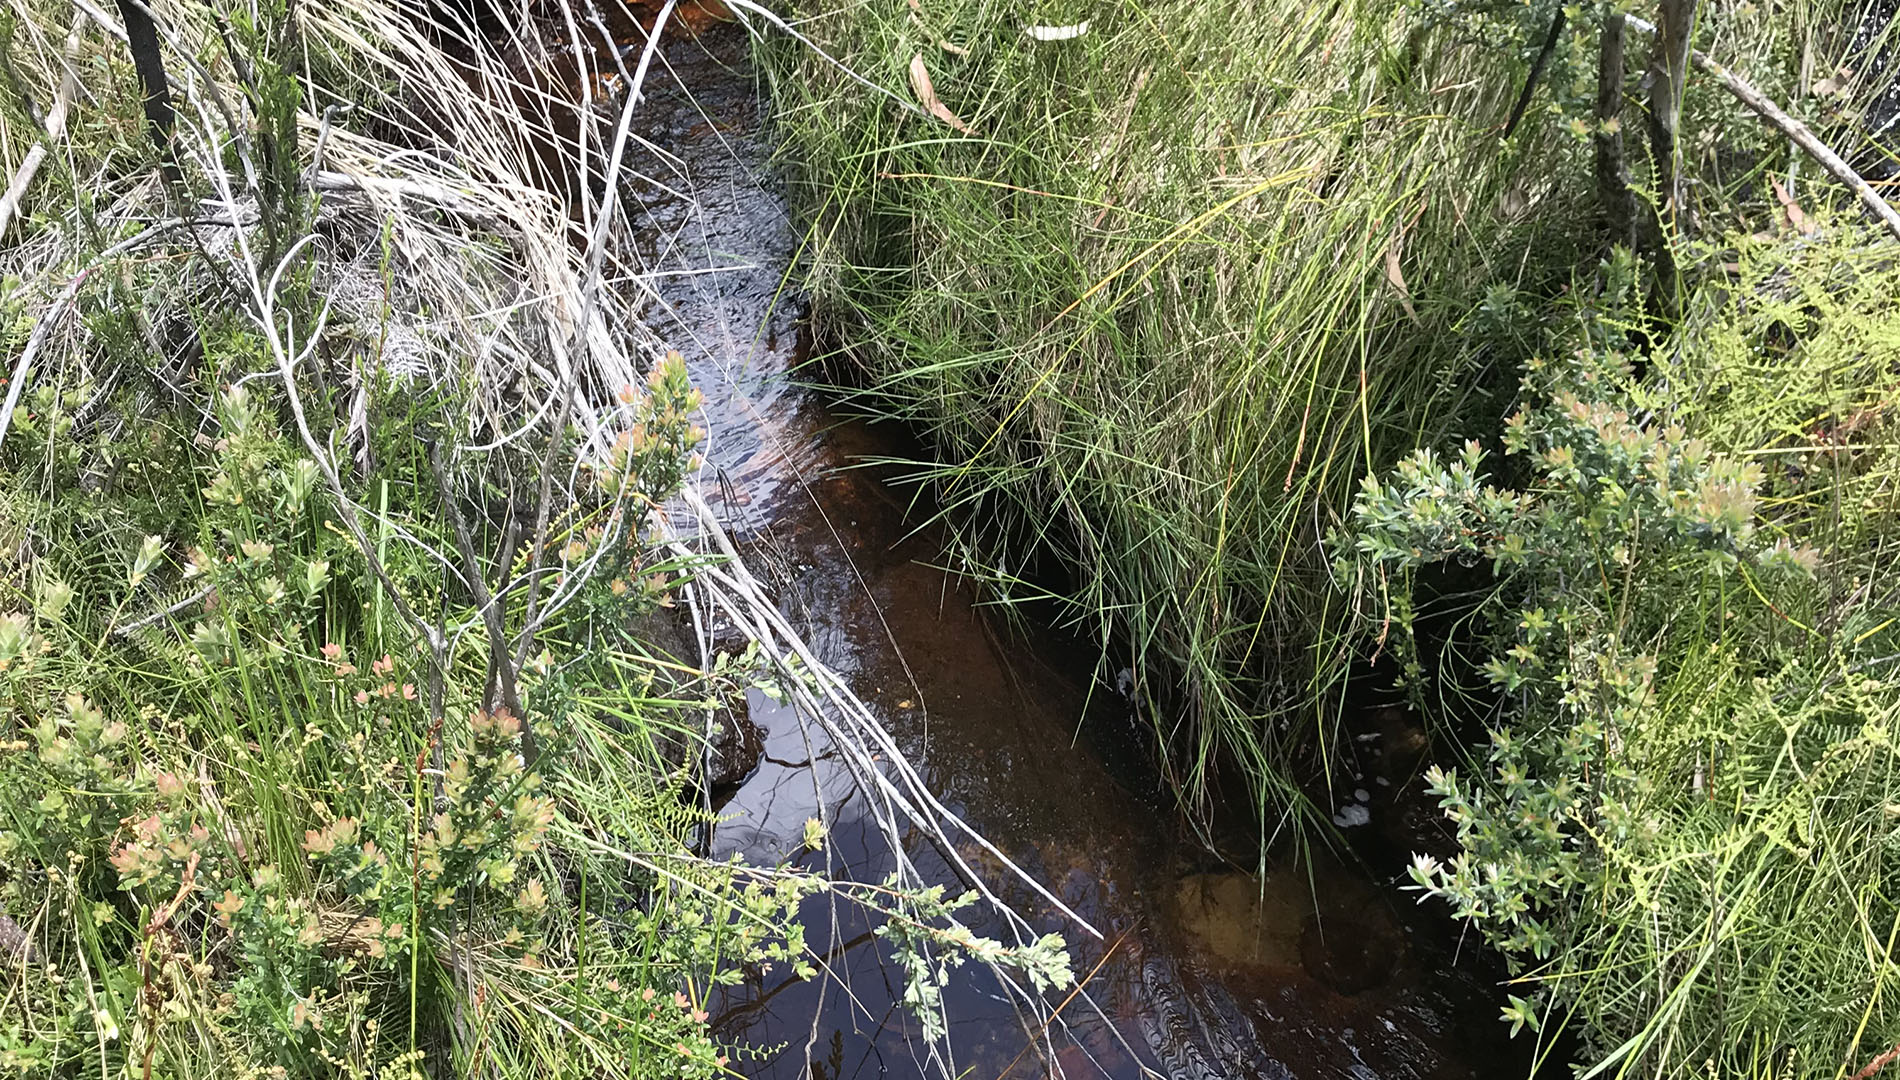 The surface water discharge from an upland swamp. The water discharged from swamps has filtered through swamp sediments and may carry giant dragonfly environmental DNA from burrows in the swamp.